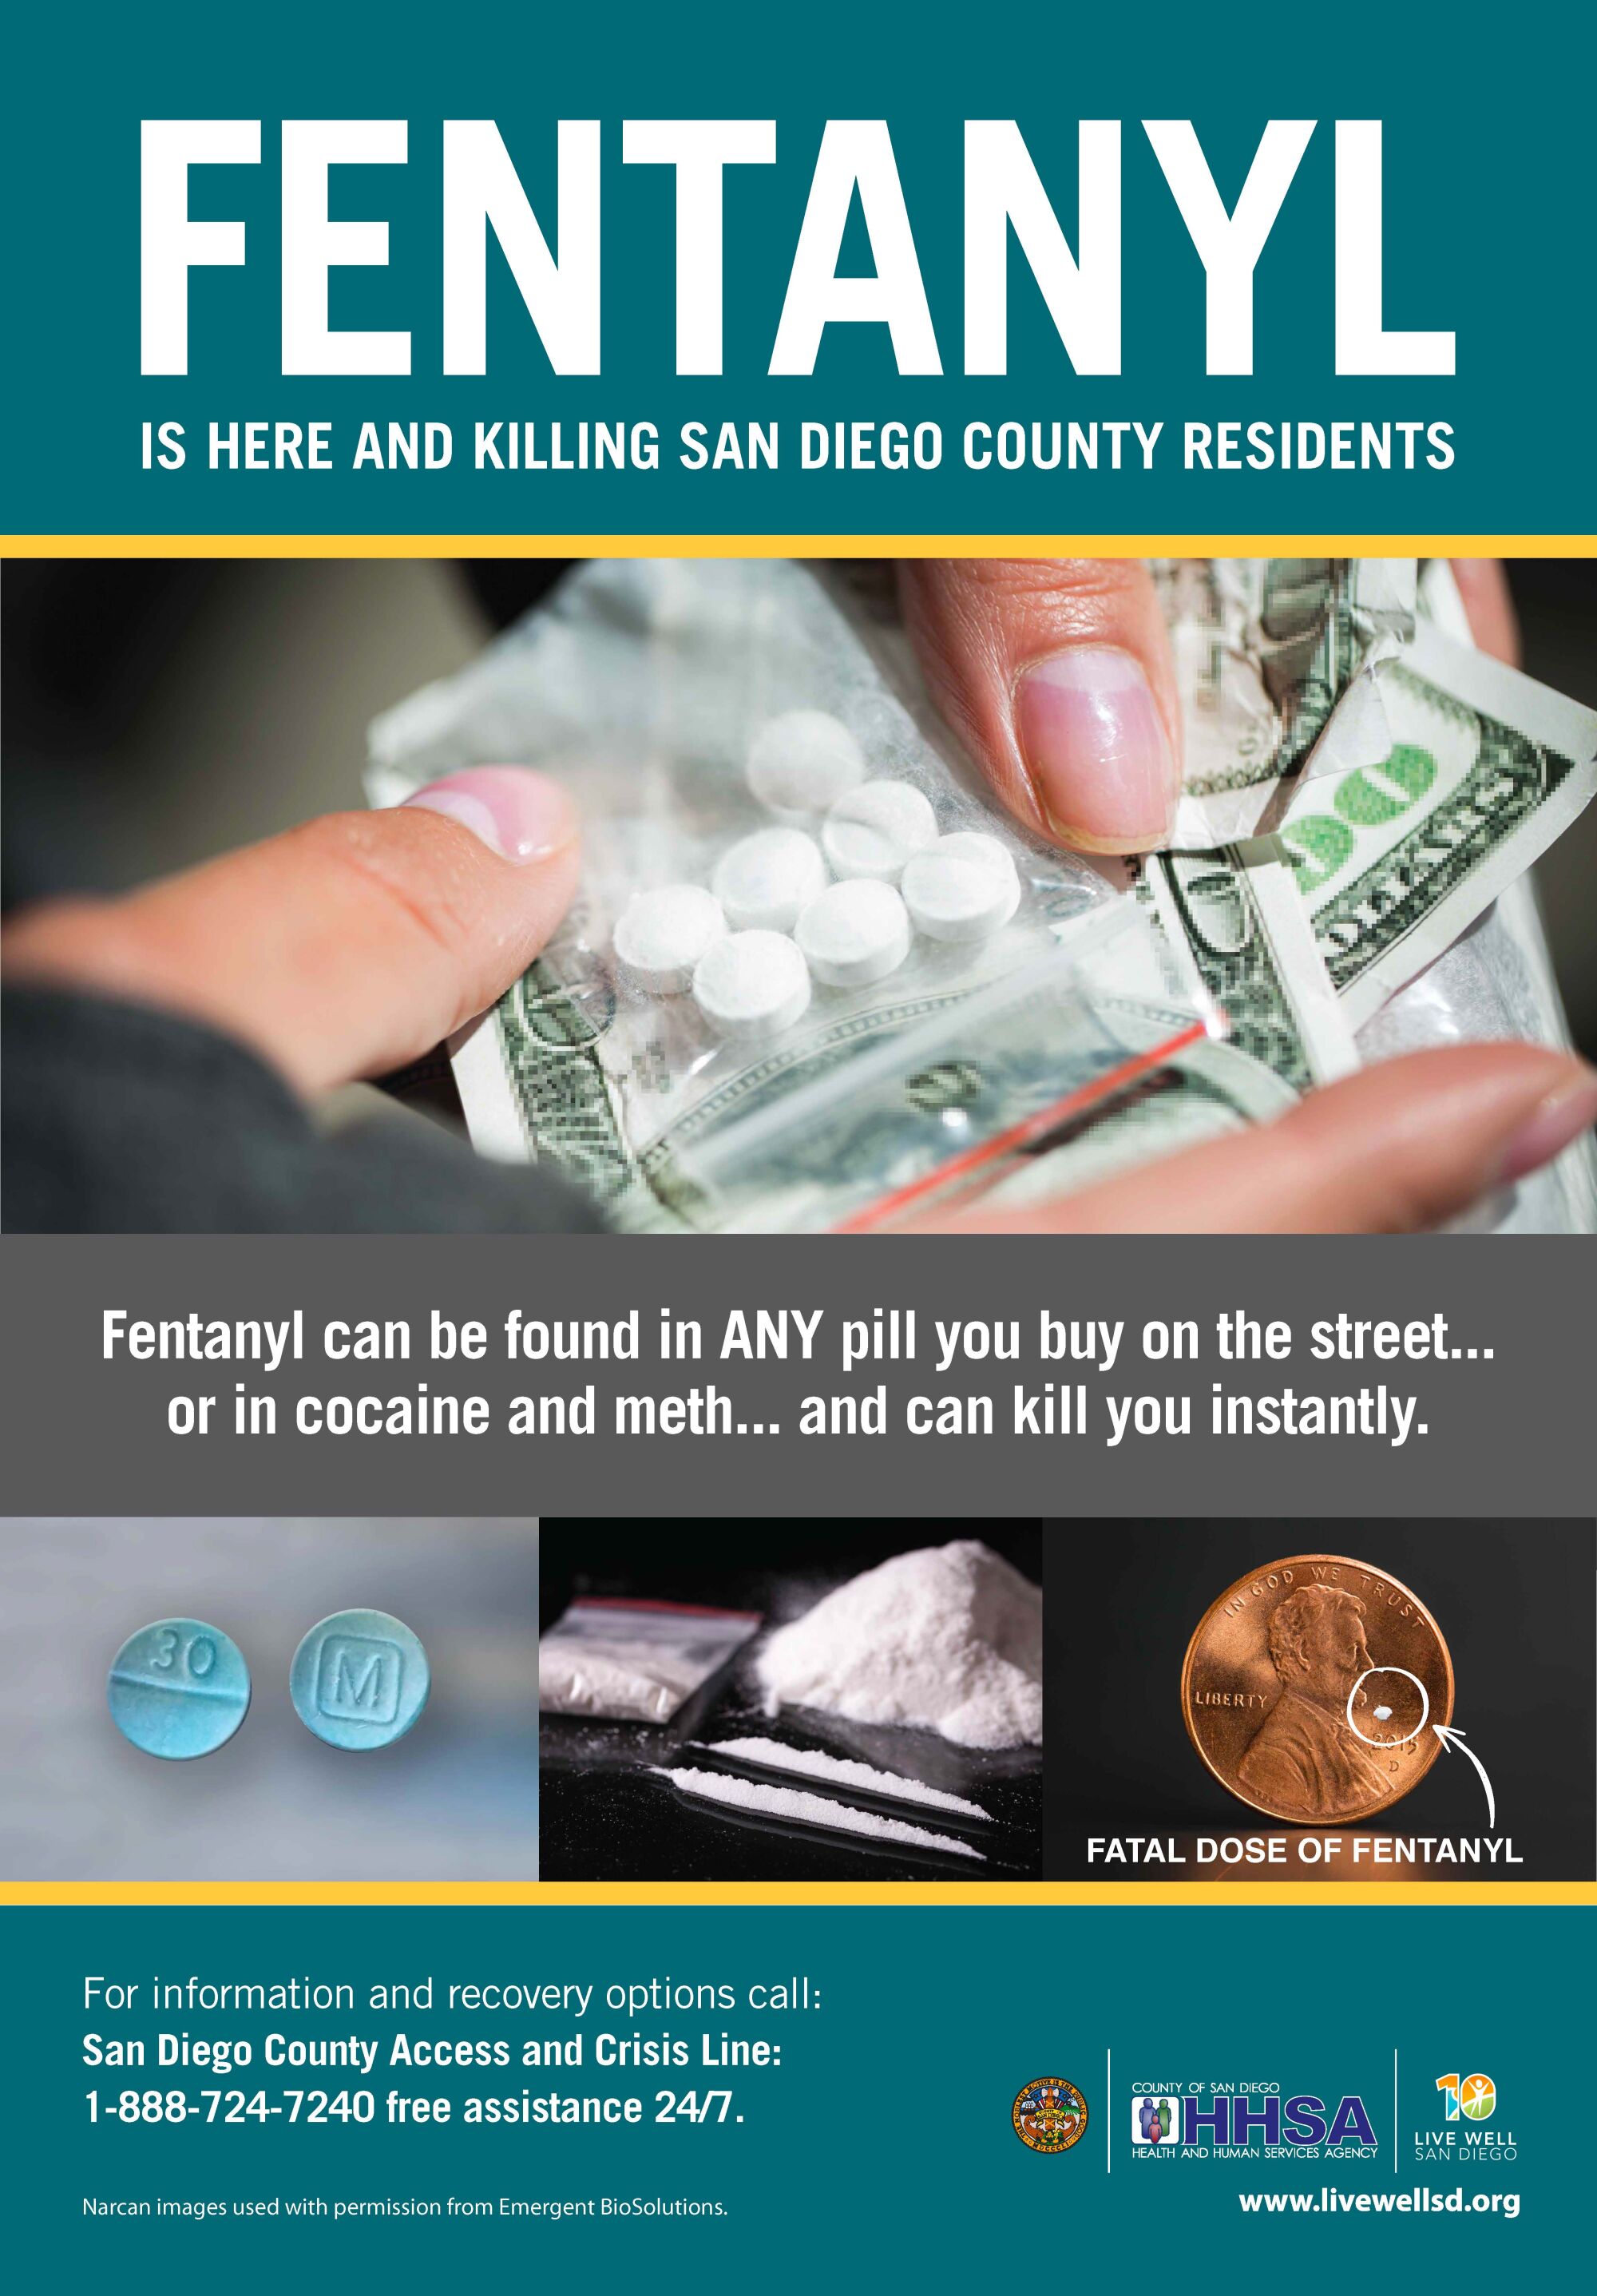 San Diego County Fentanyl awareness poster